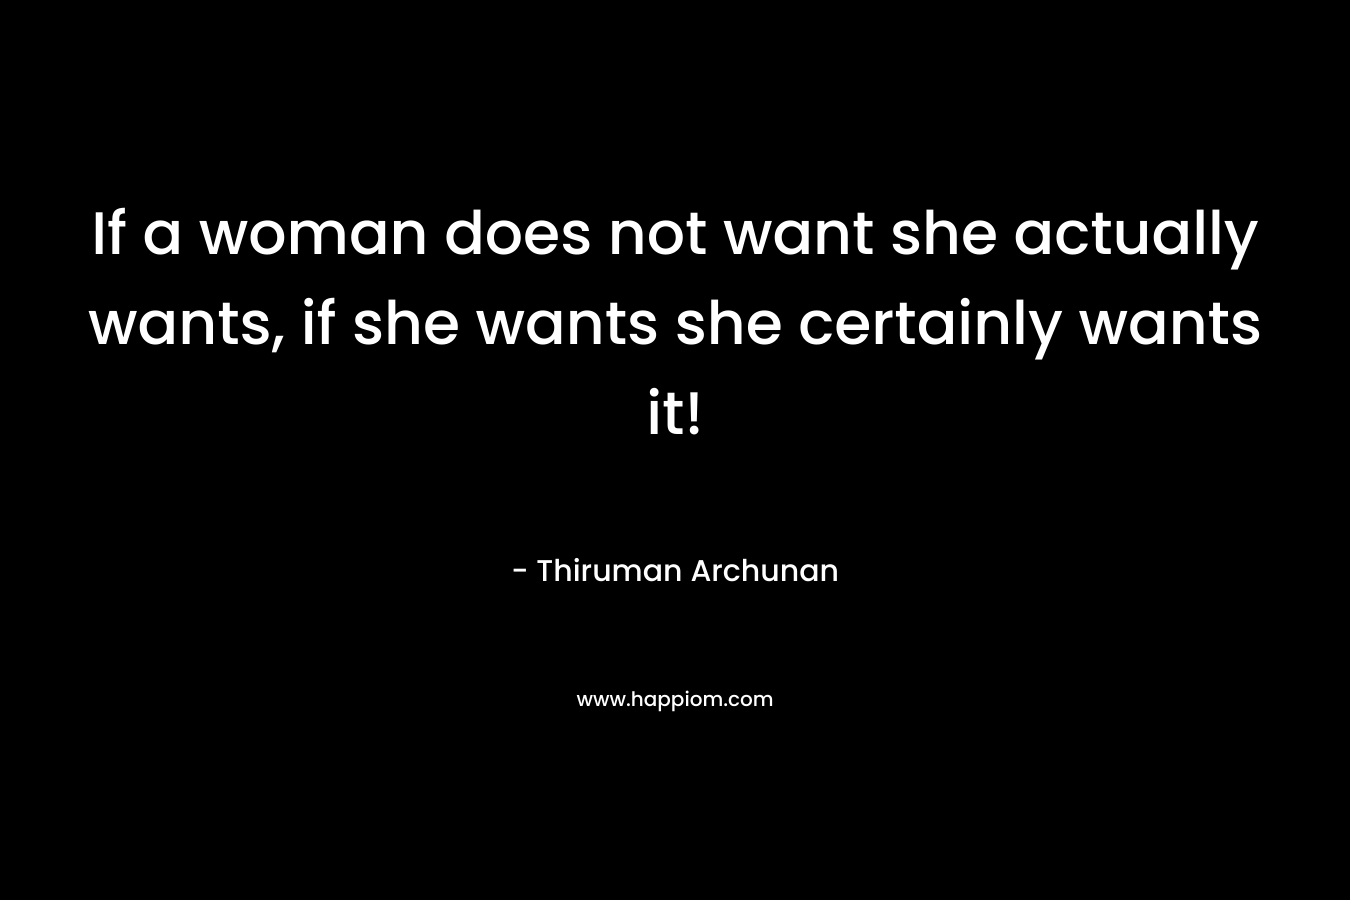 If a woman does not want she actually wants, if she wants she certainly wants it!